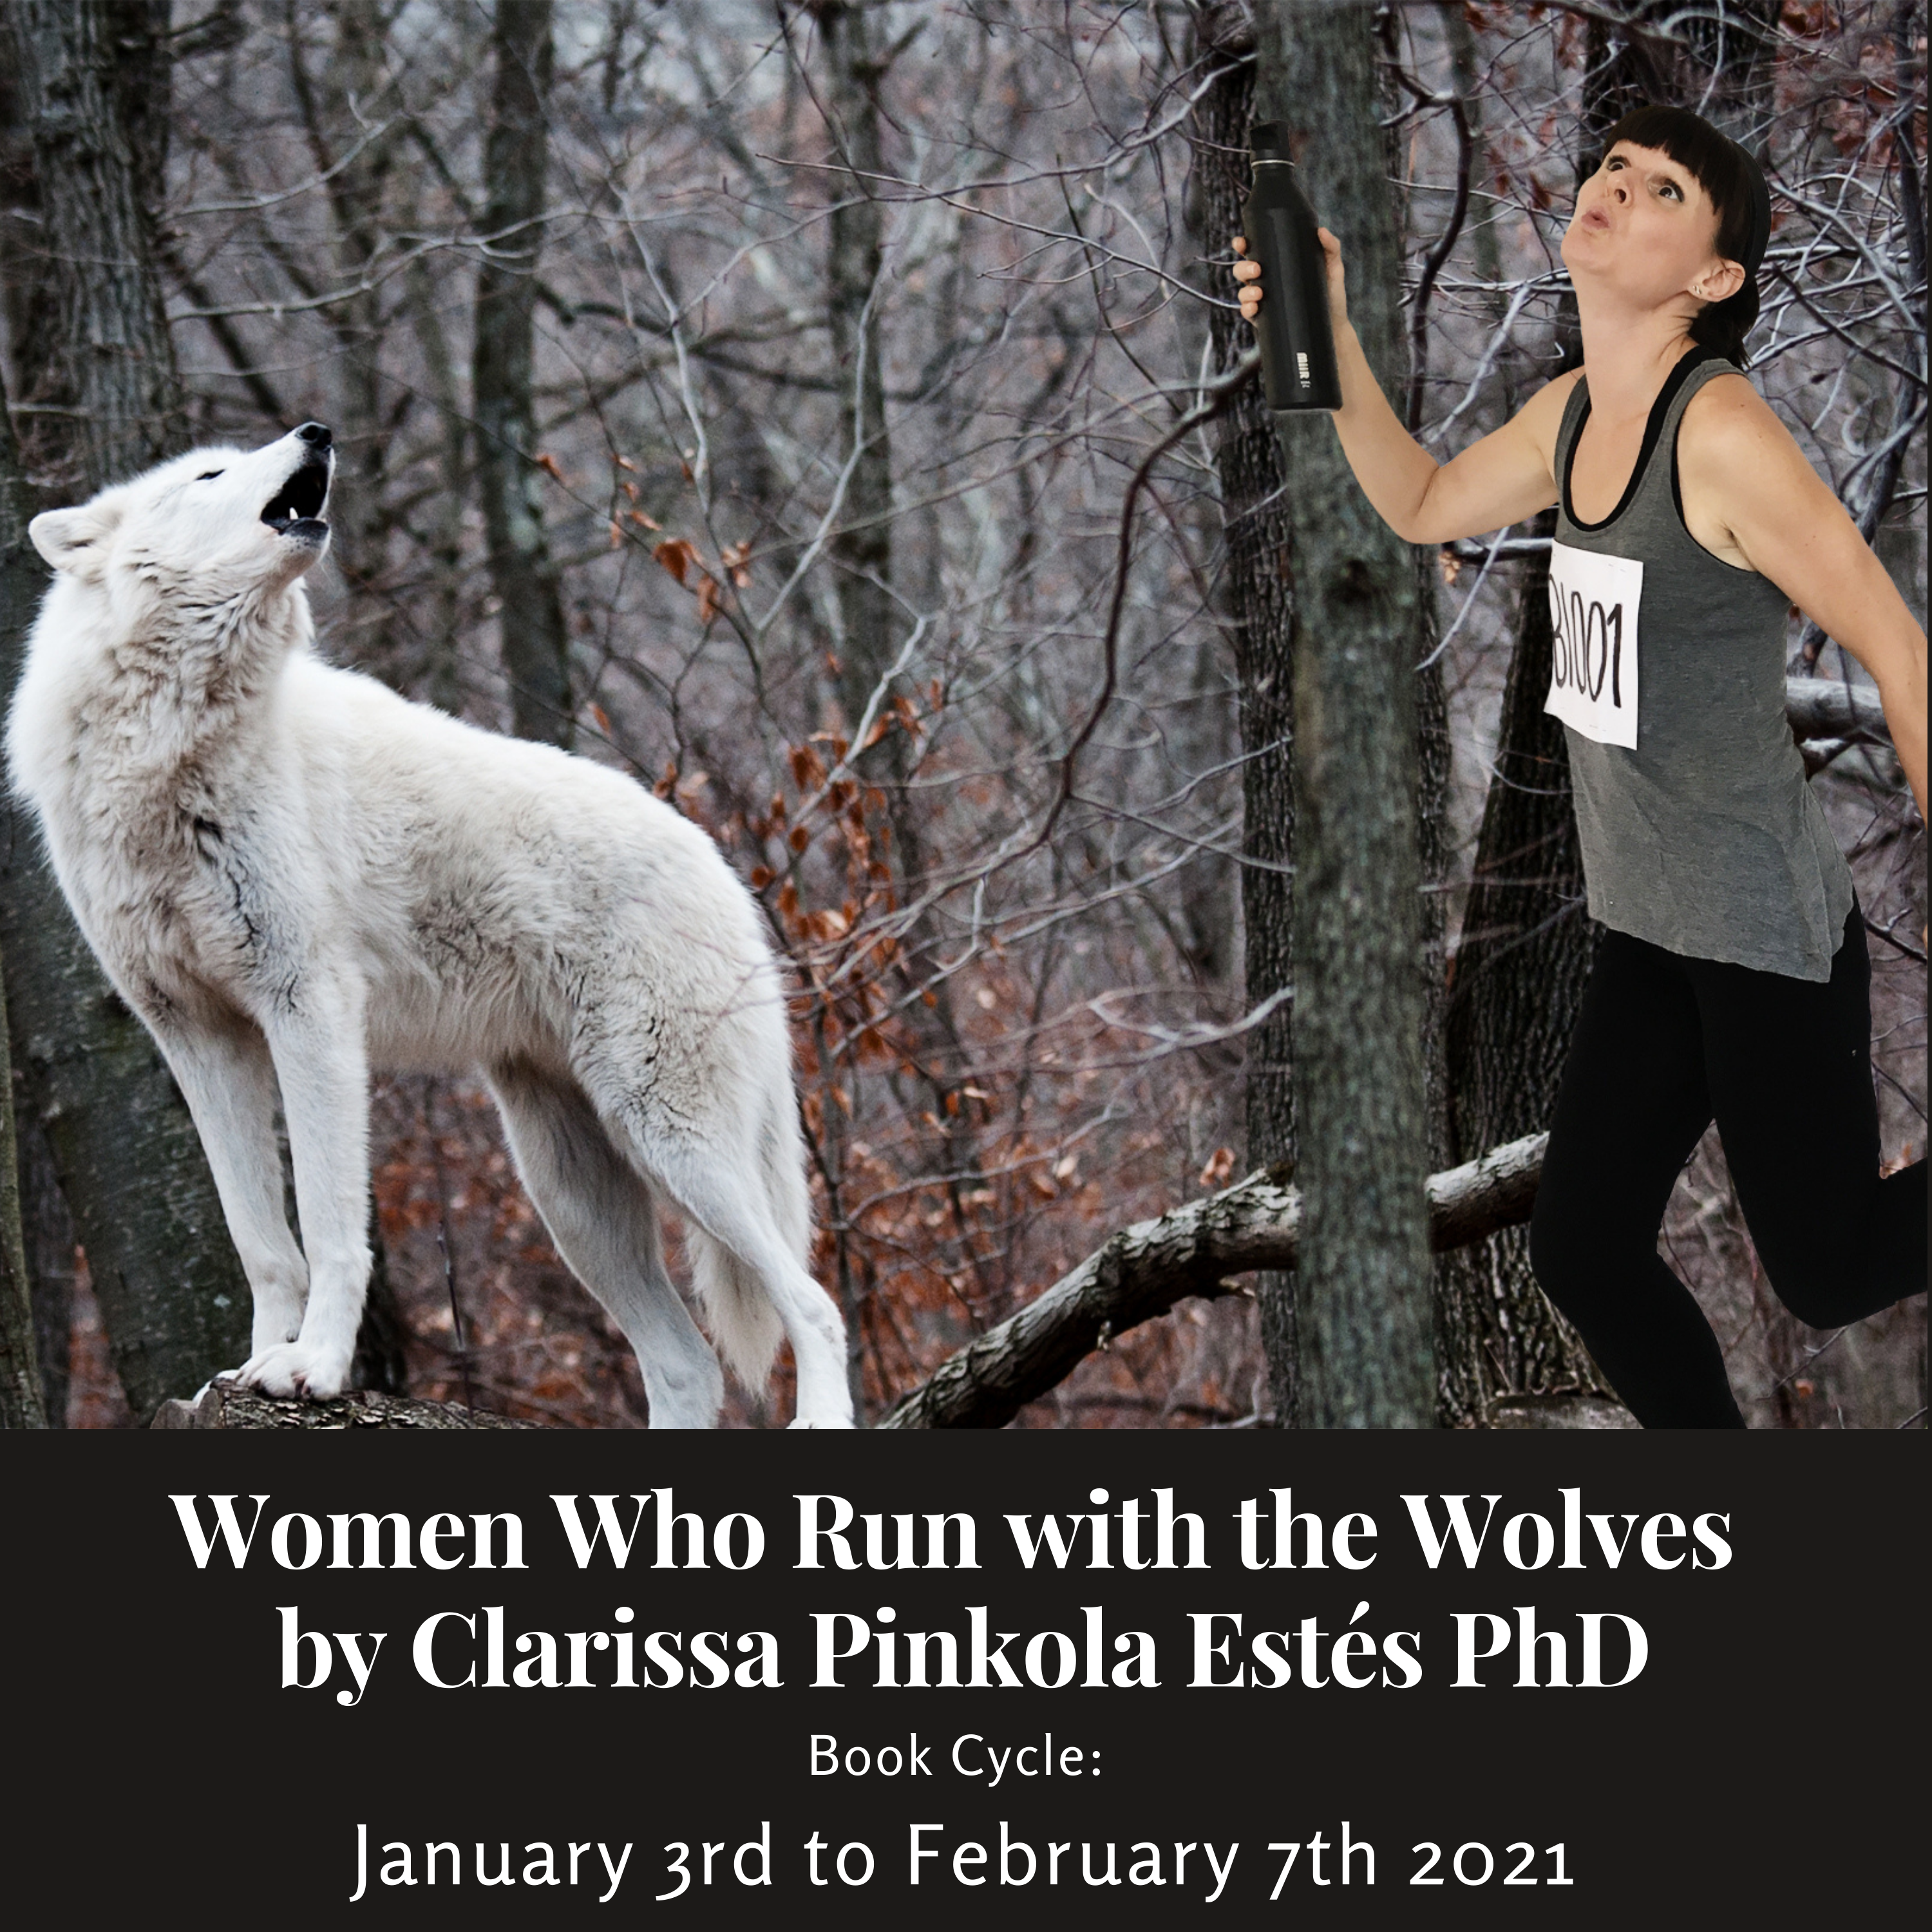 Women Who Run with the Wolves Episode 6 